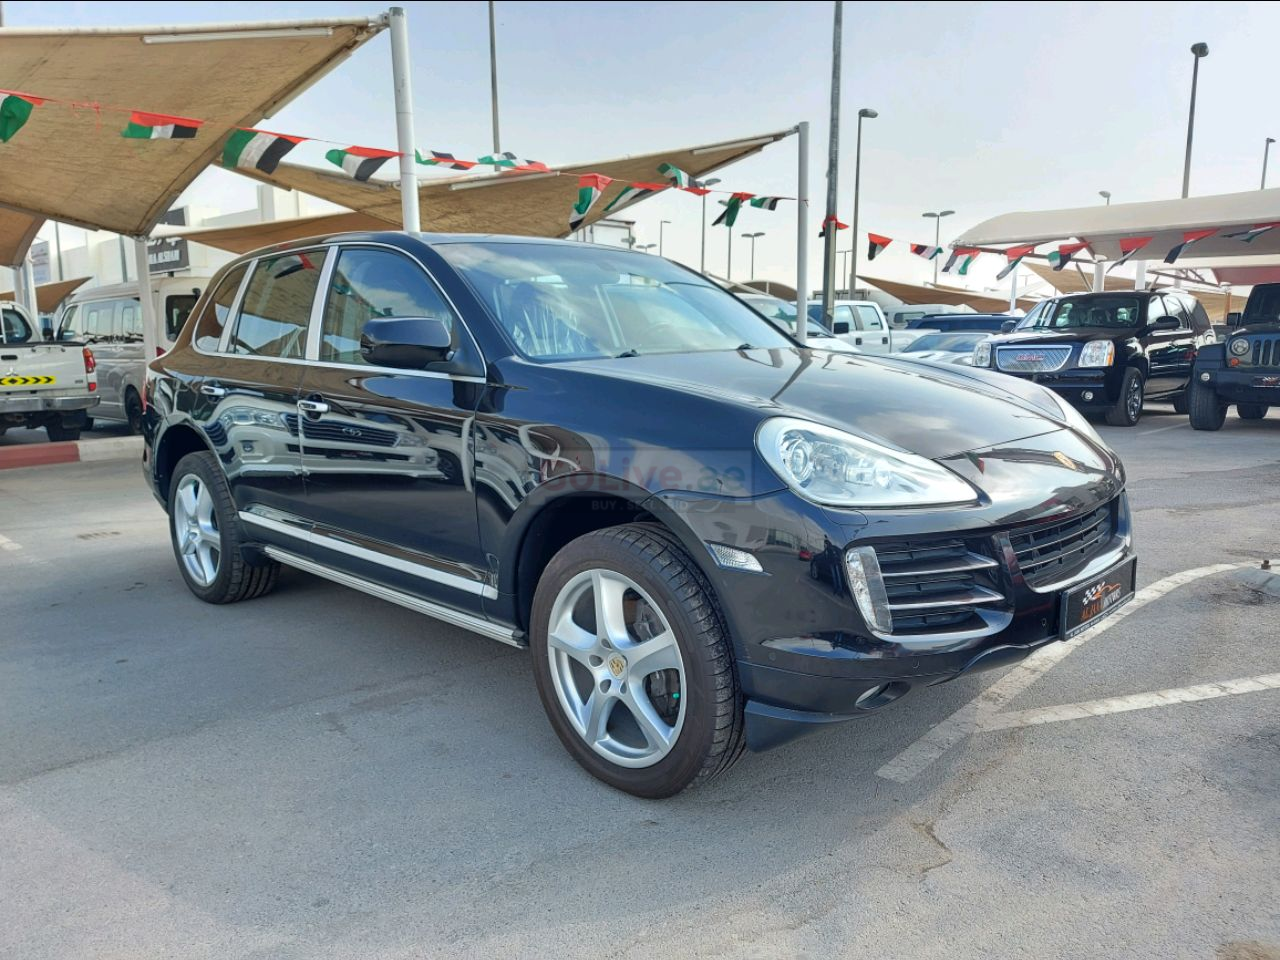 Porsche Cayenne 2010 AED 35,000, GCC Spec, Good condition, Full Option, Sunroof, Navigation System, Negotiable